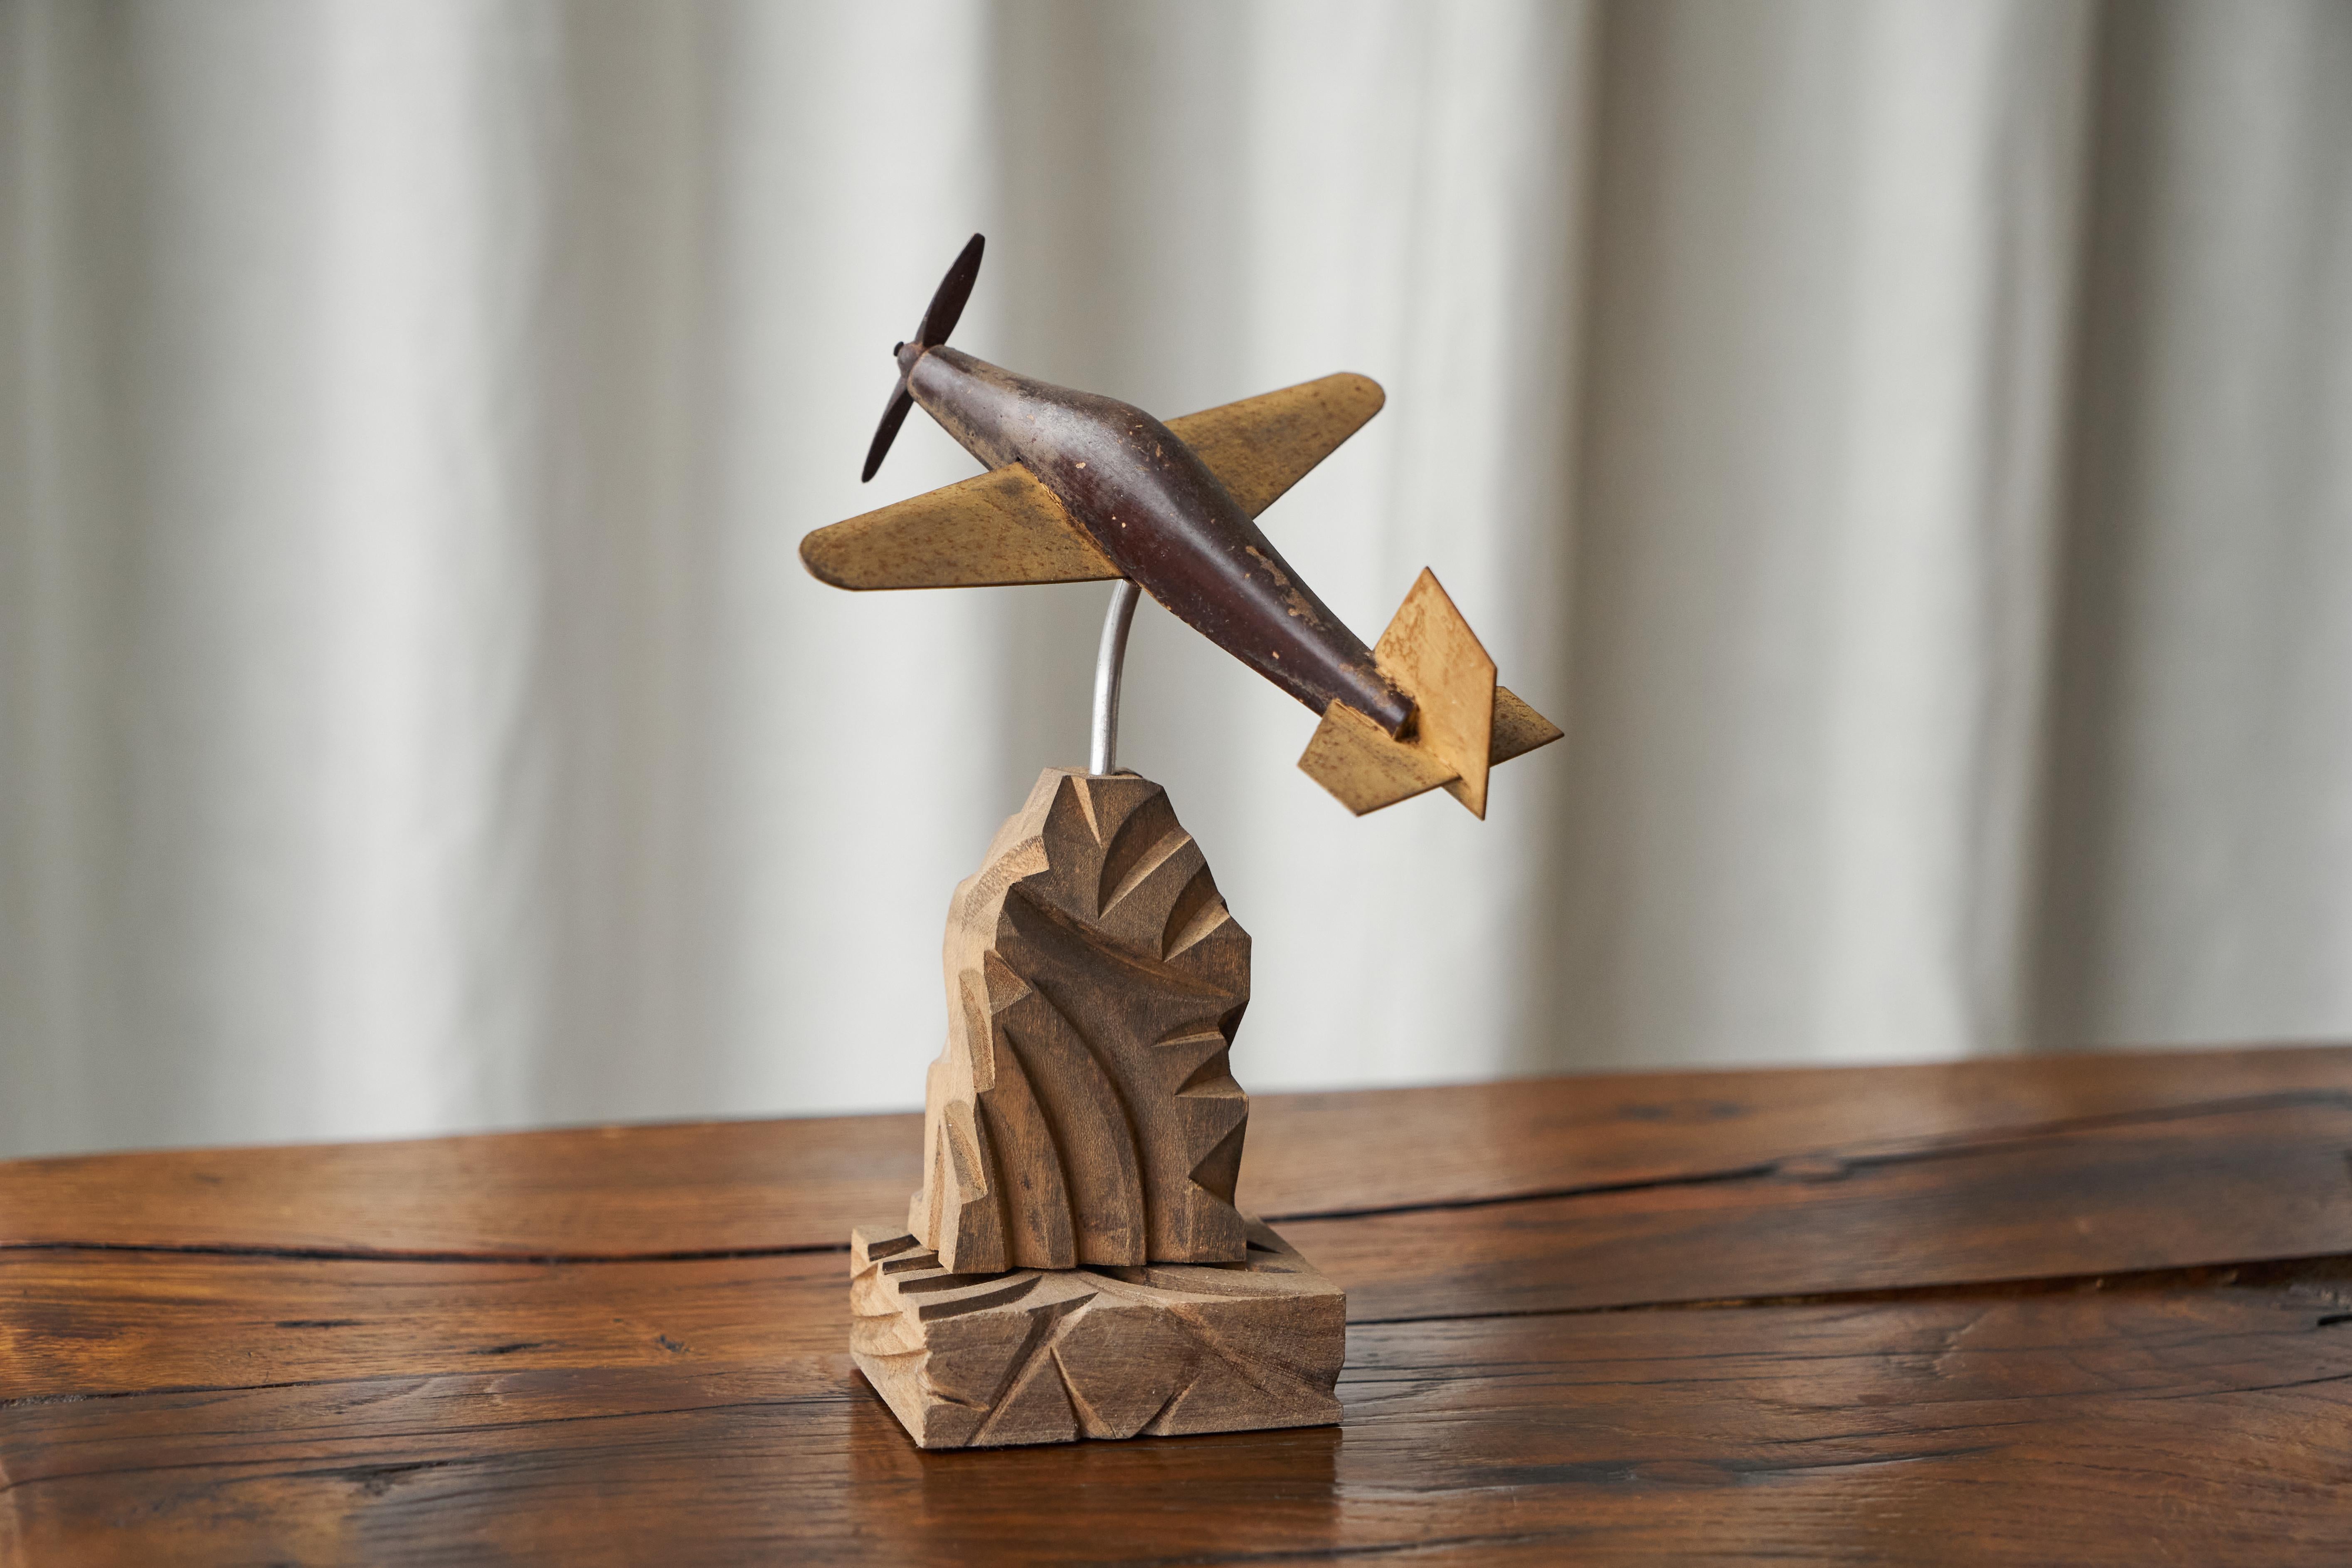 Art Deco Propeller Plane in Carved Wood and Metal

Sometimes you find a piece that is just right…. This Art Deco propeller plane is a wonderful example of a fun and easthetic object. Well made in wood and metal, placed in a dynamic position onto a